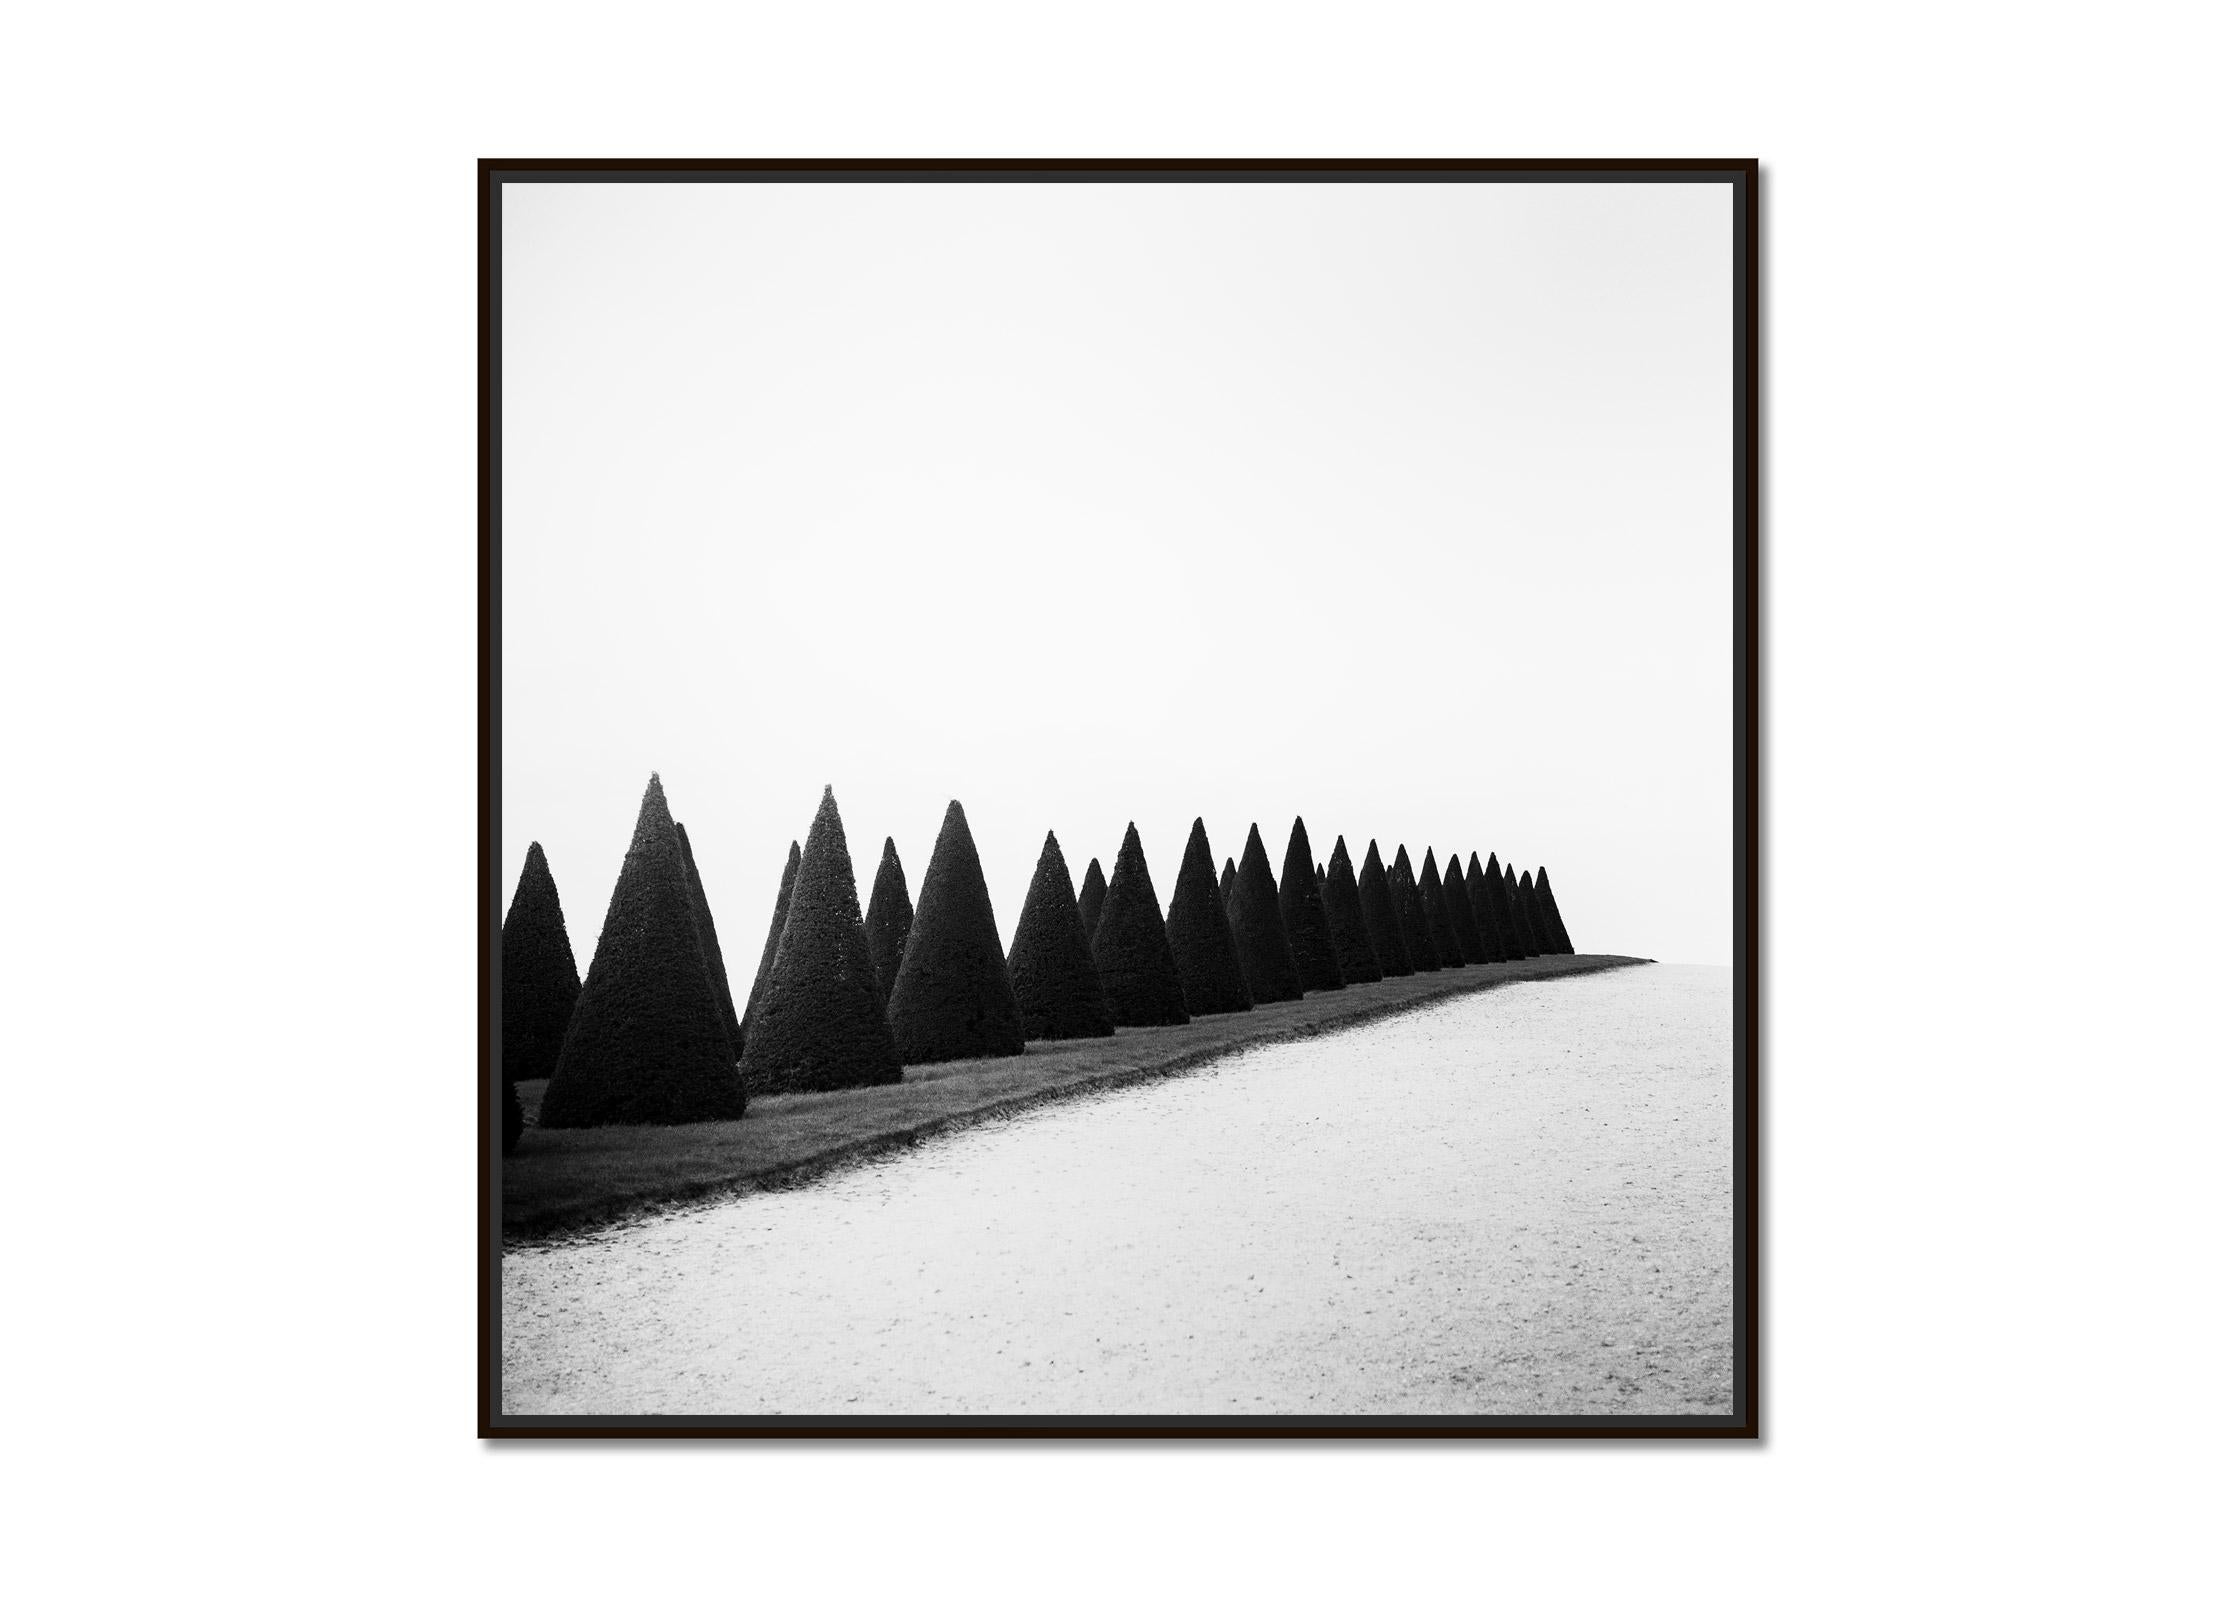 Hedges, Versailles, Paris, France, black and white fineart landscape photography - Photograph by Gerald Berghammer